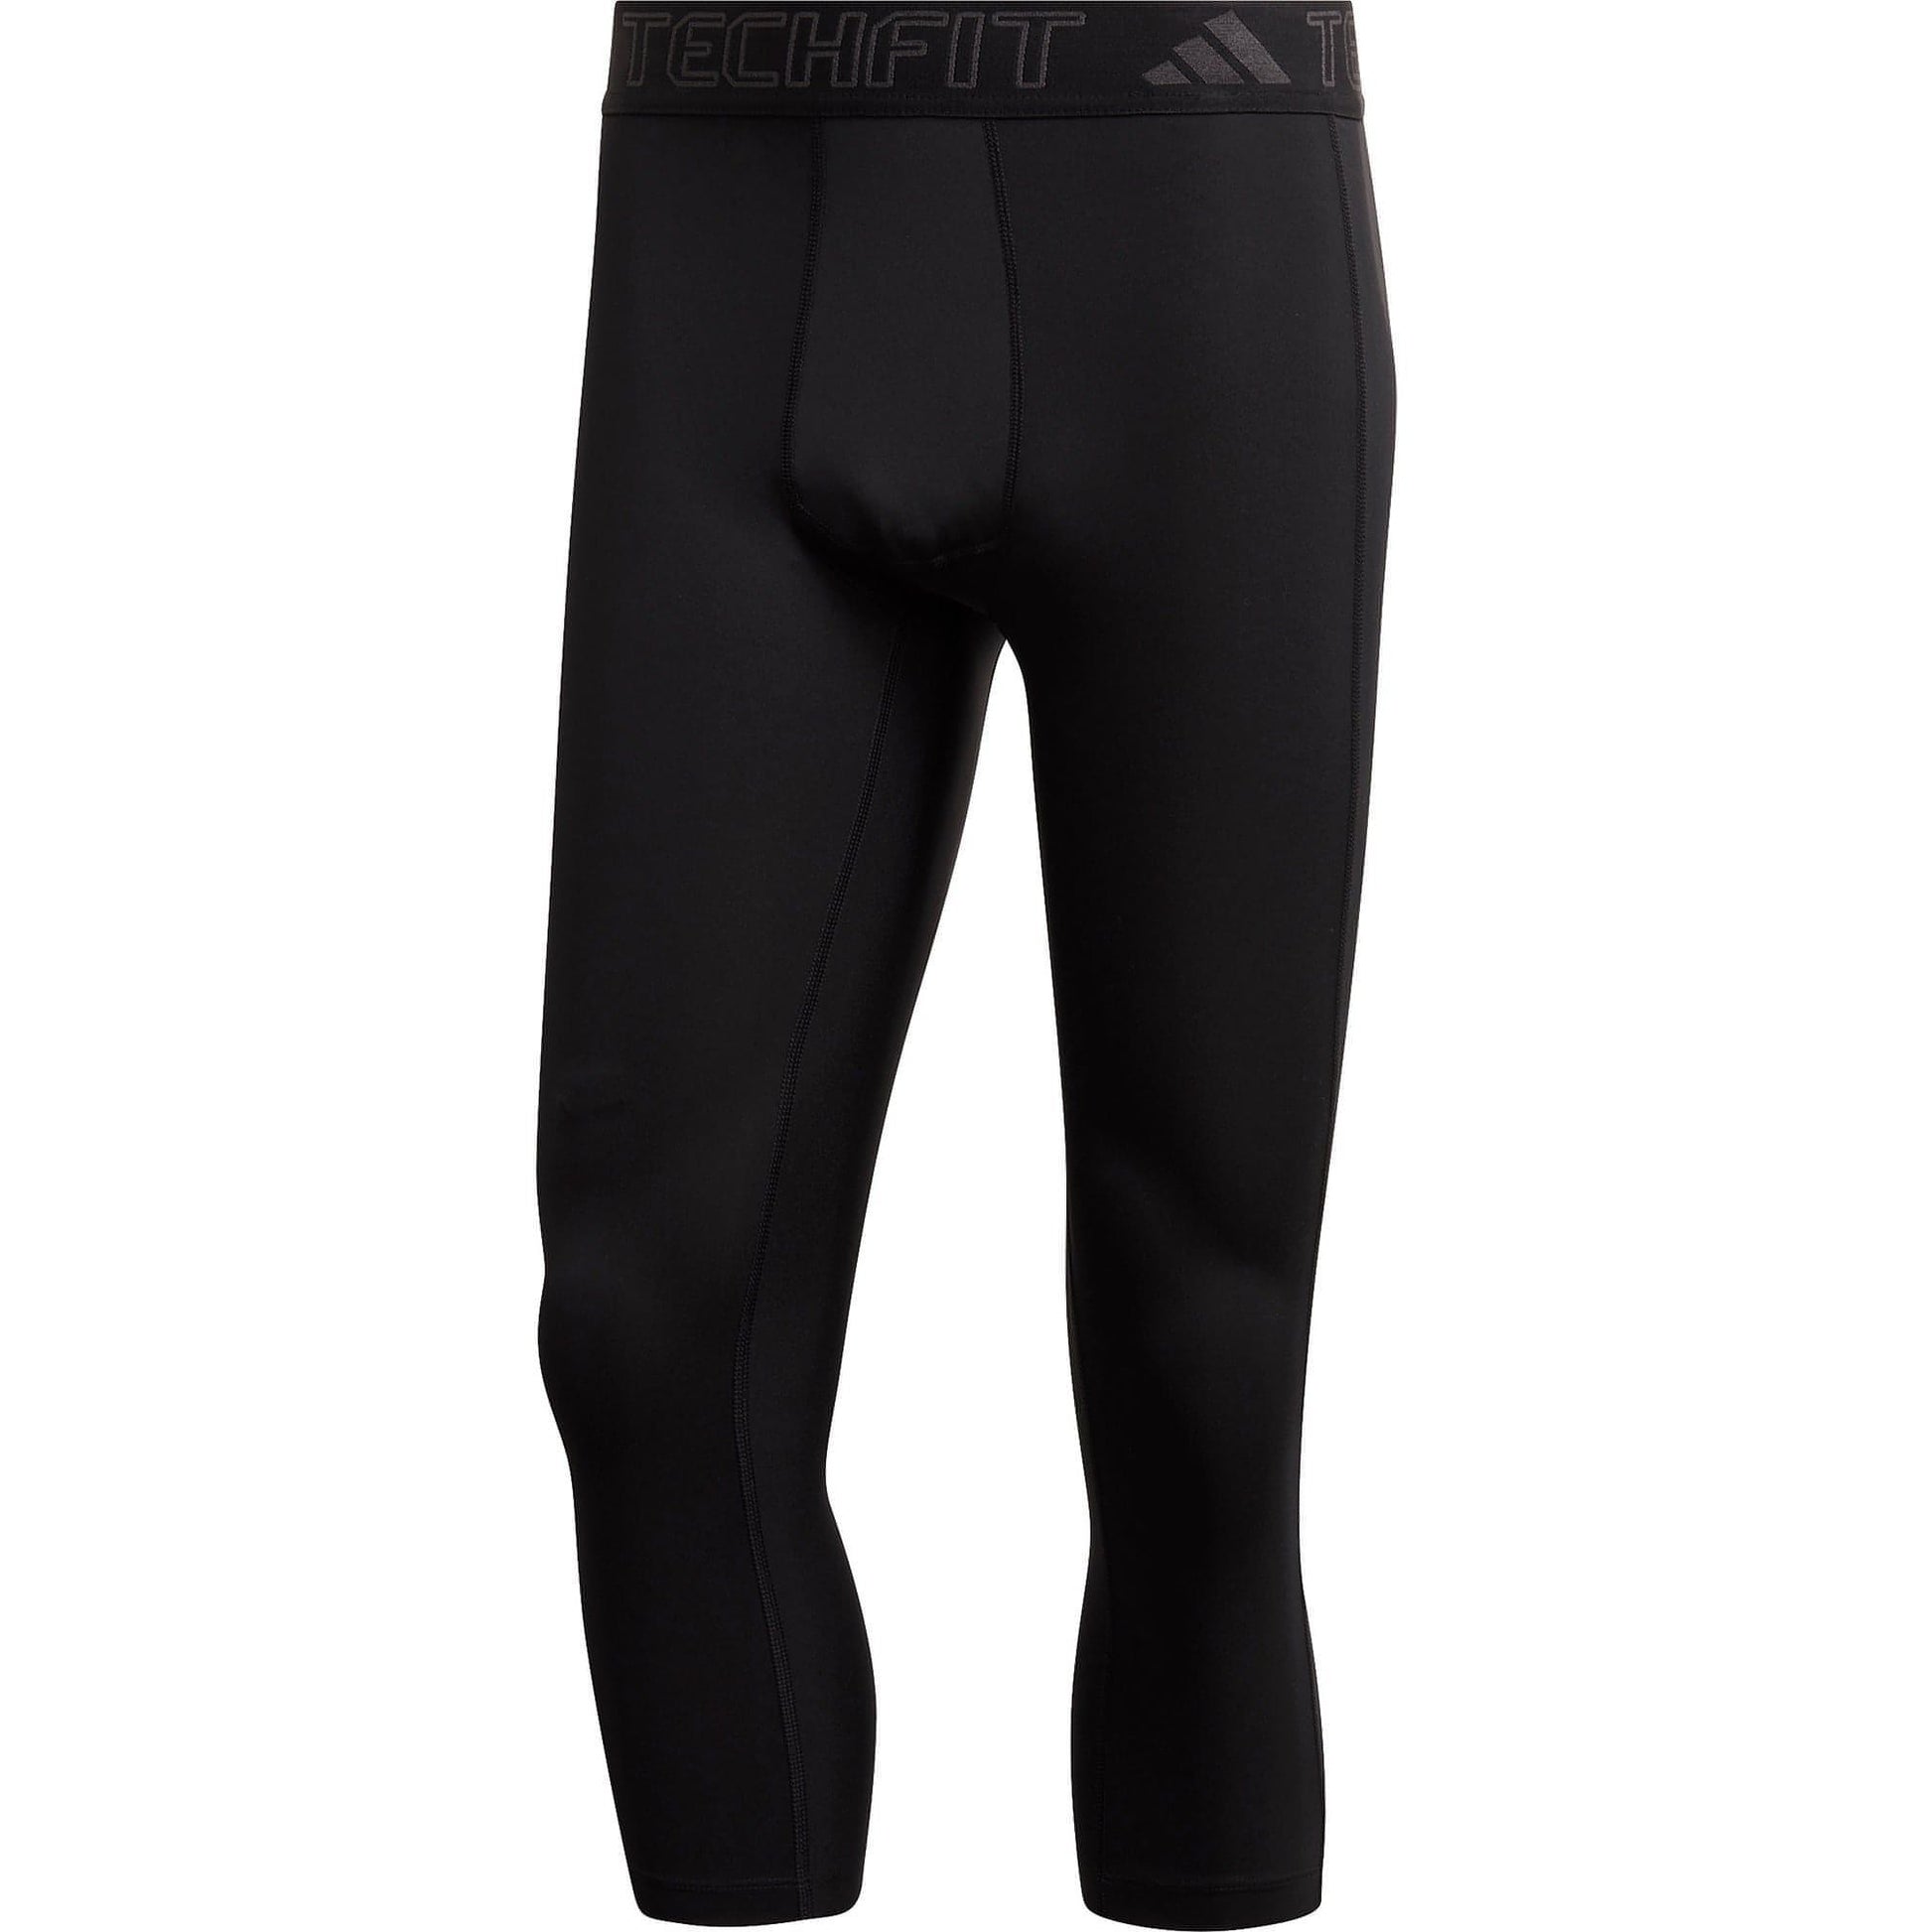 Adidas Tech Fit Tights Hd3523 Front - Front View